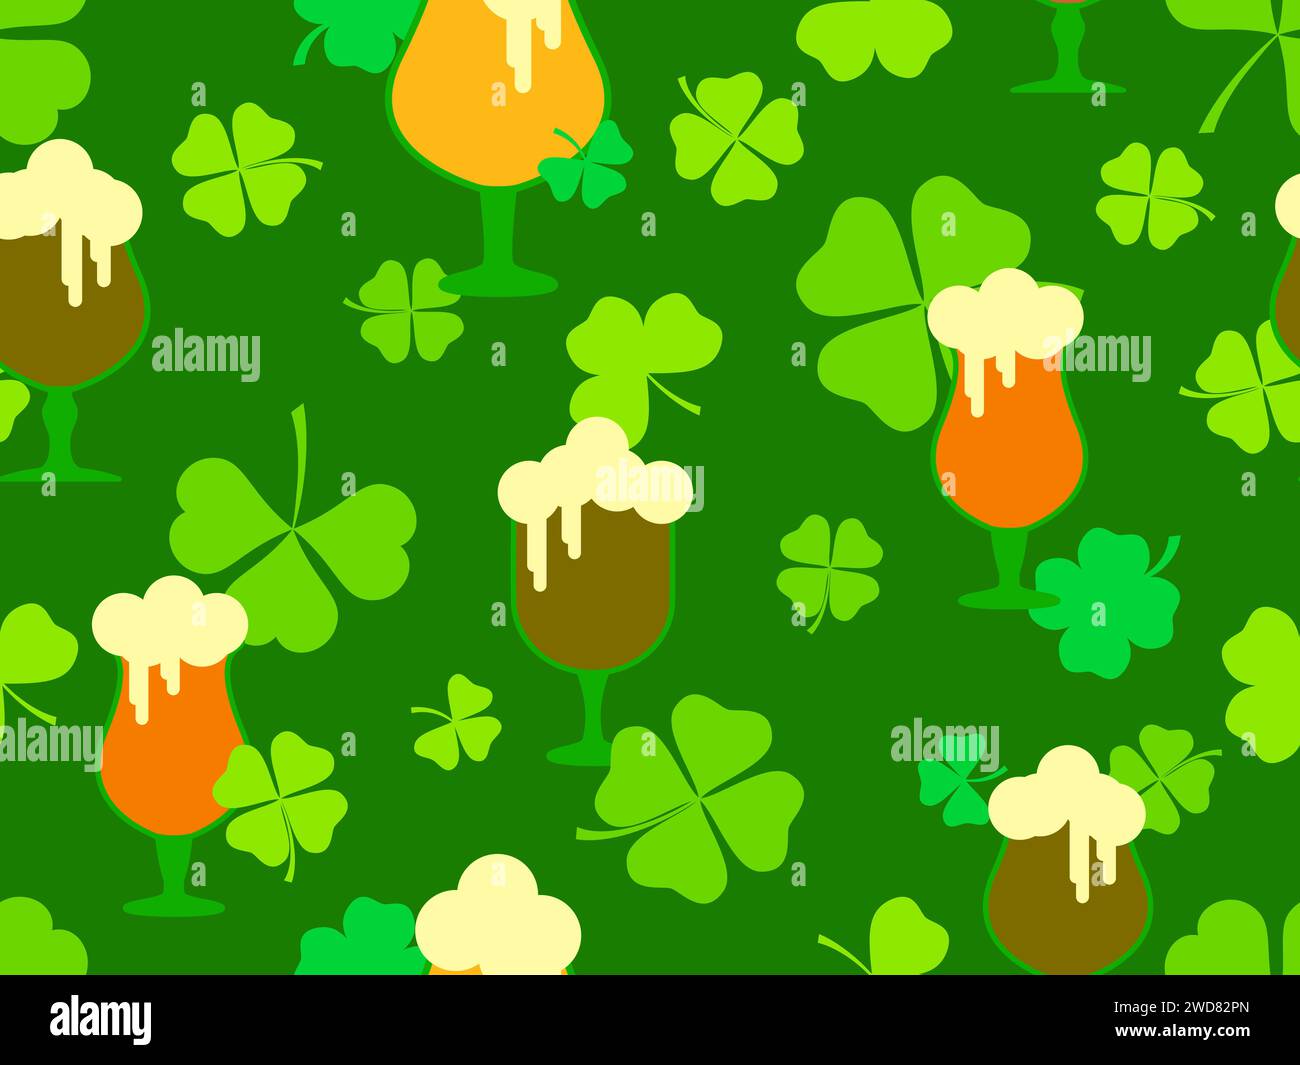 Seamless pattern with clover leaves and glasses of beer for St. Patrick's Day. Glasses of beer on a stem with foam. Festive design for wallpaper, bann Stock Vector